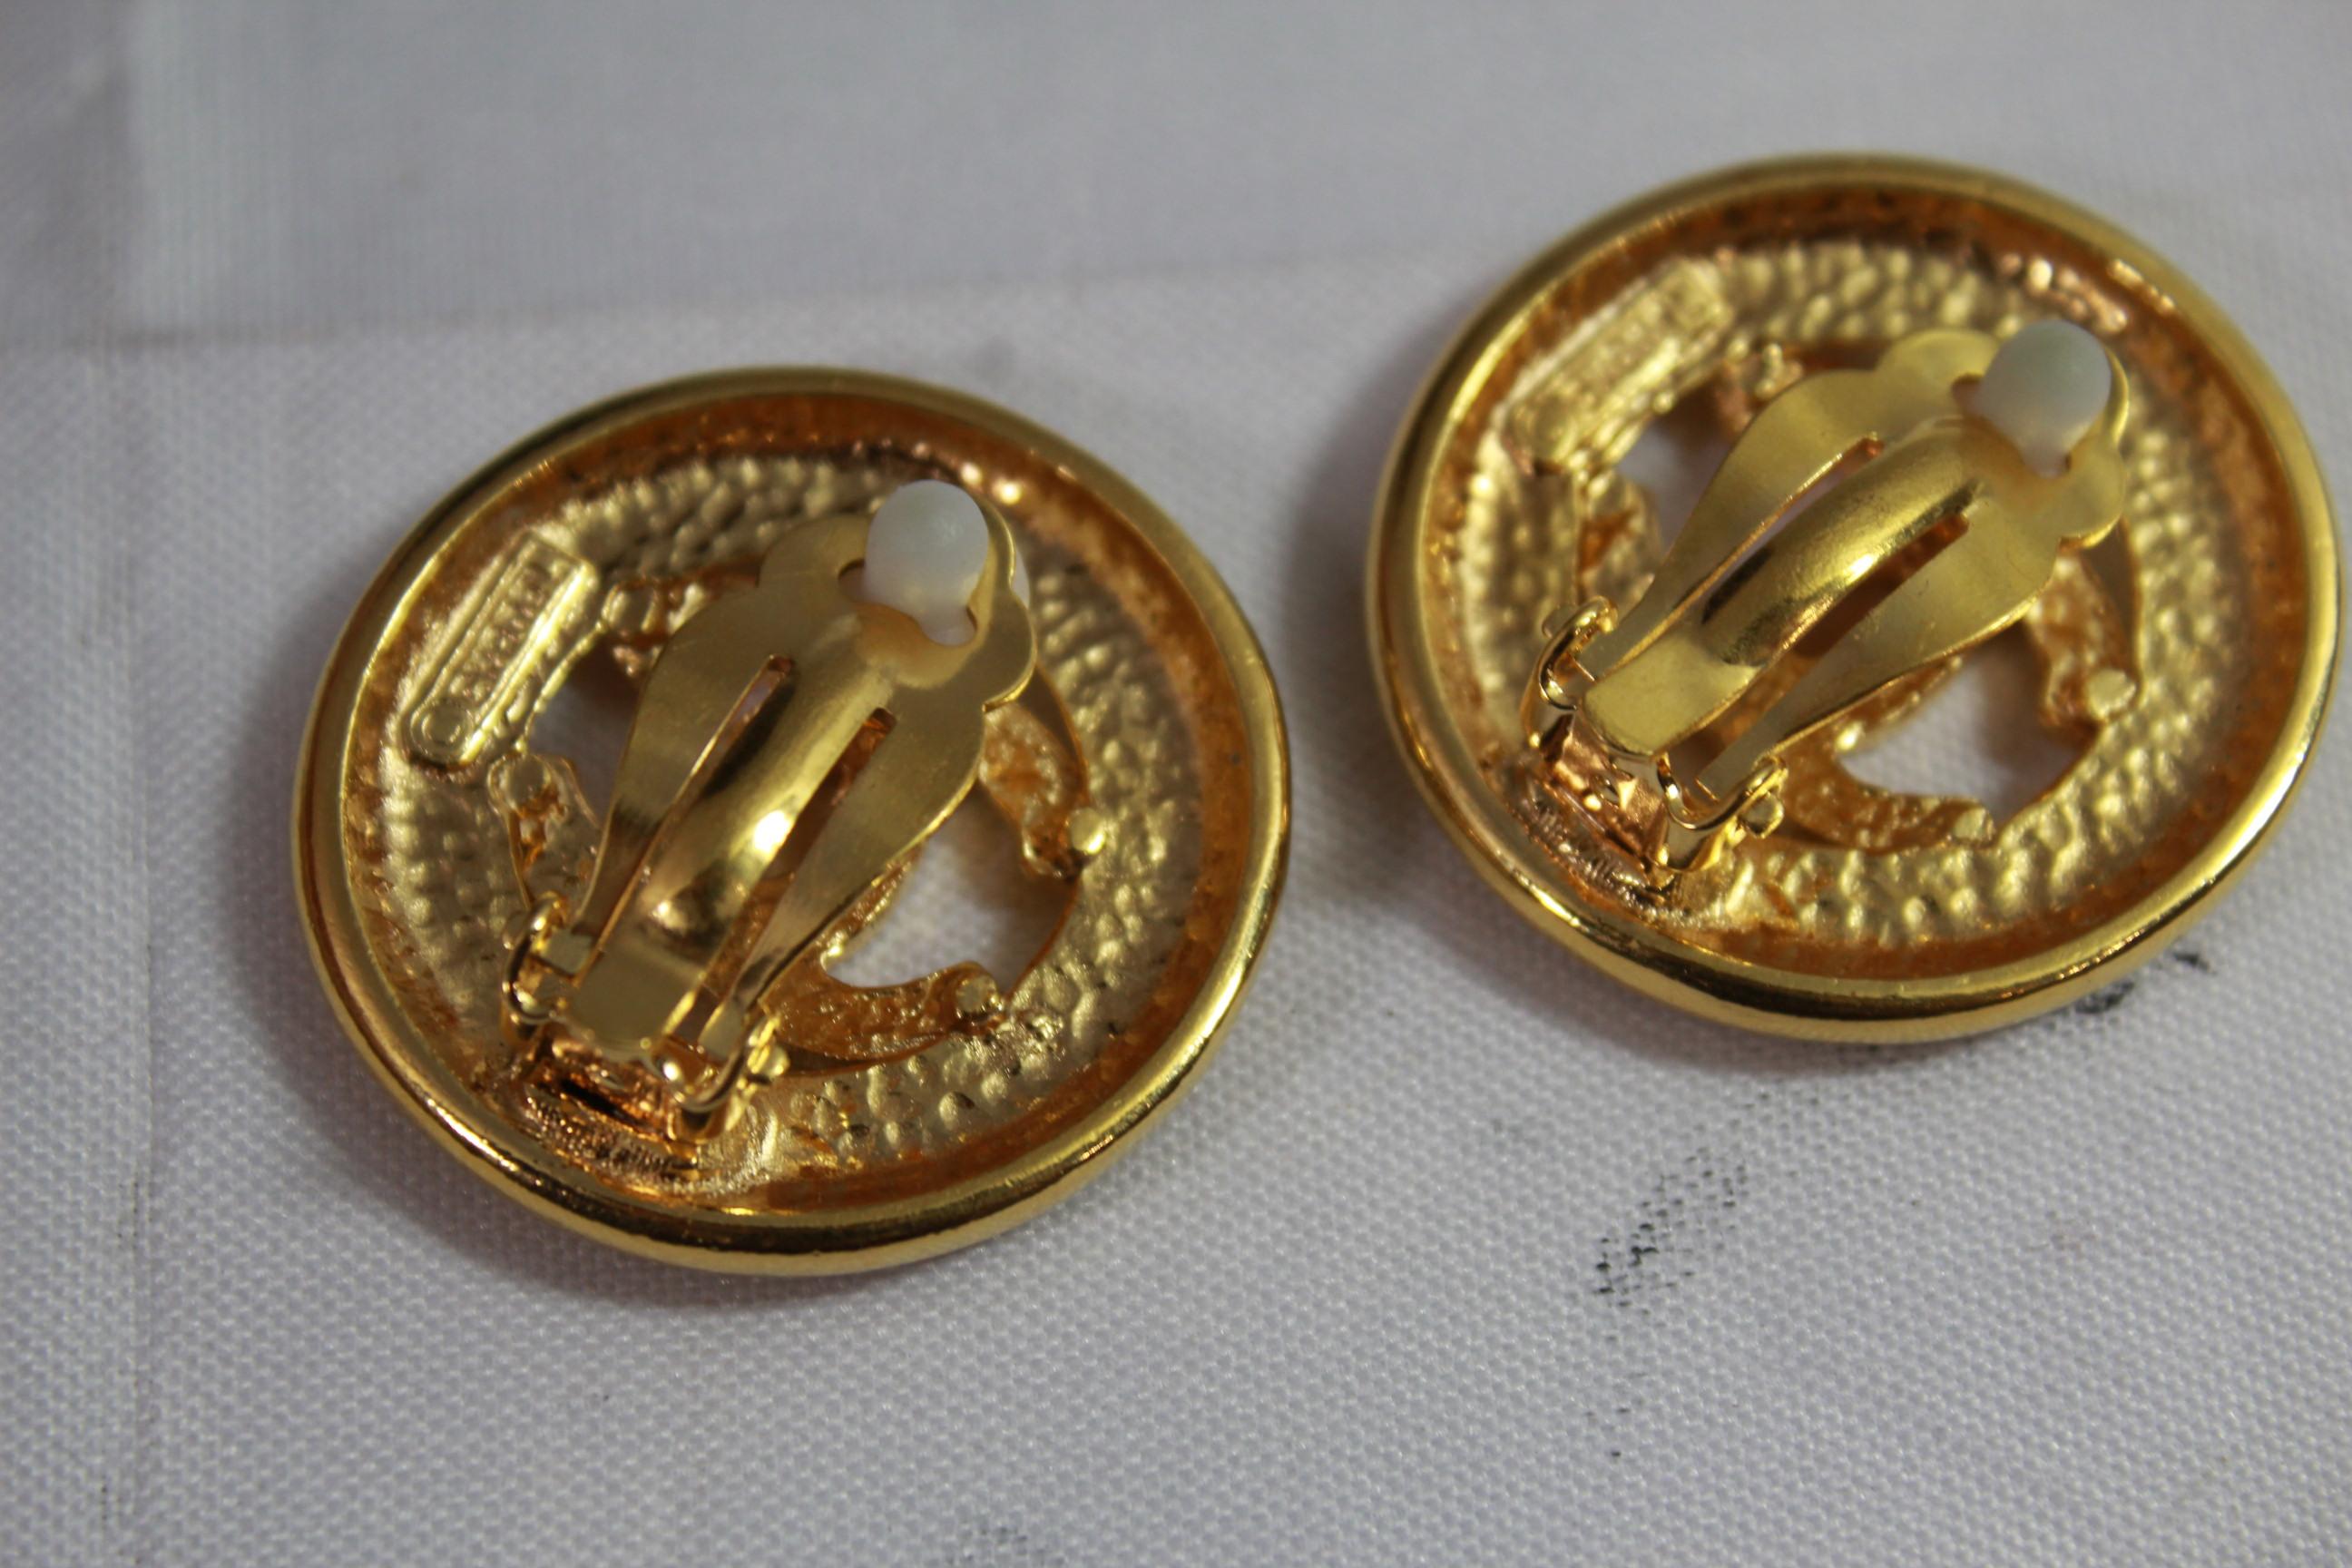 Vintage Chanel earrings in gold plated metal. 
Good vintage condition.
Size 2.6 cm
Clip system